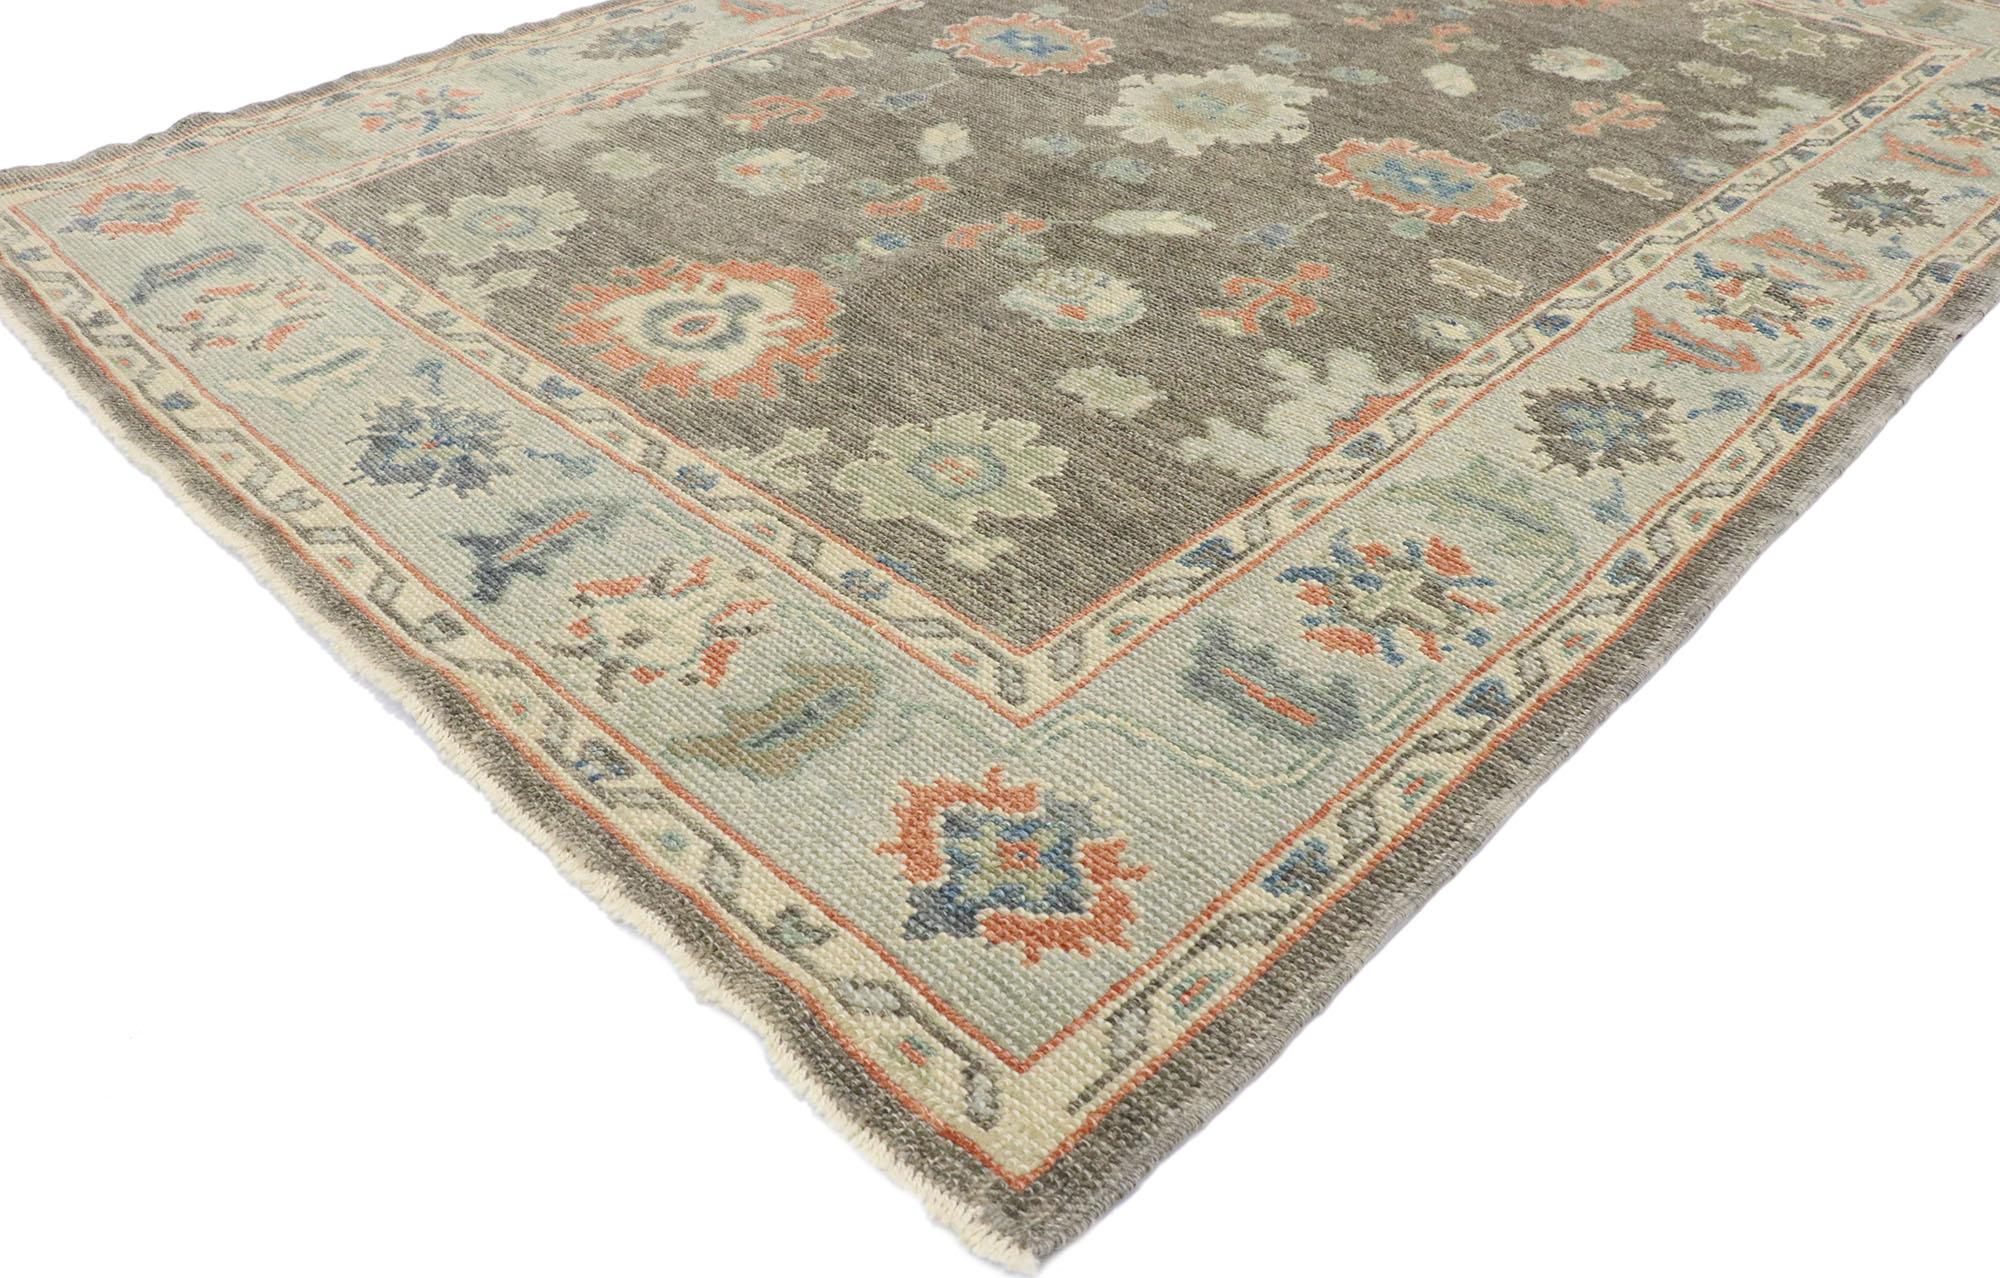 53425, new contemporary Turkish Oushak rug with Modern American Colonial style. Warm and inviting with effortless beauty, this hand knotted wool contemporary Turkish Oushak rug charms with ease and beautifully embodies the fine craftsmanship of